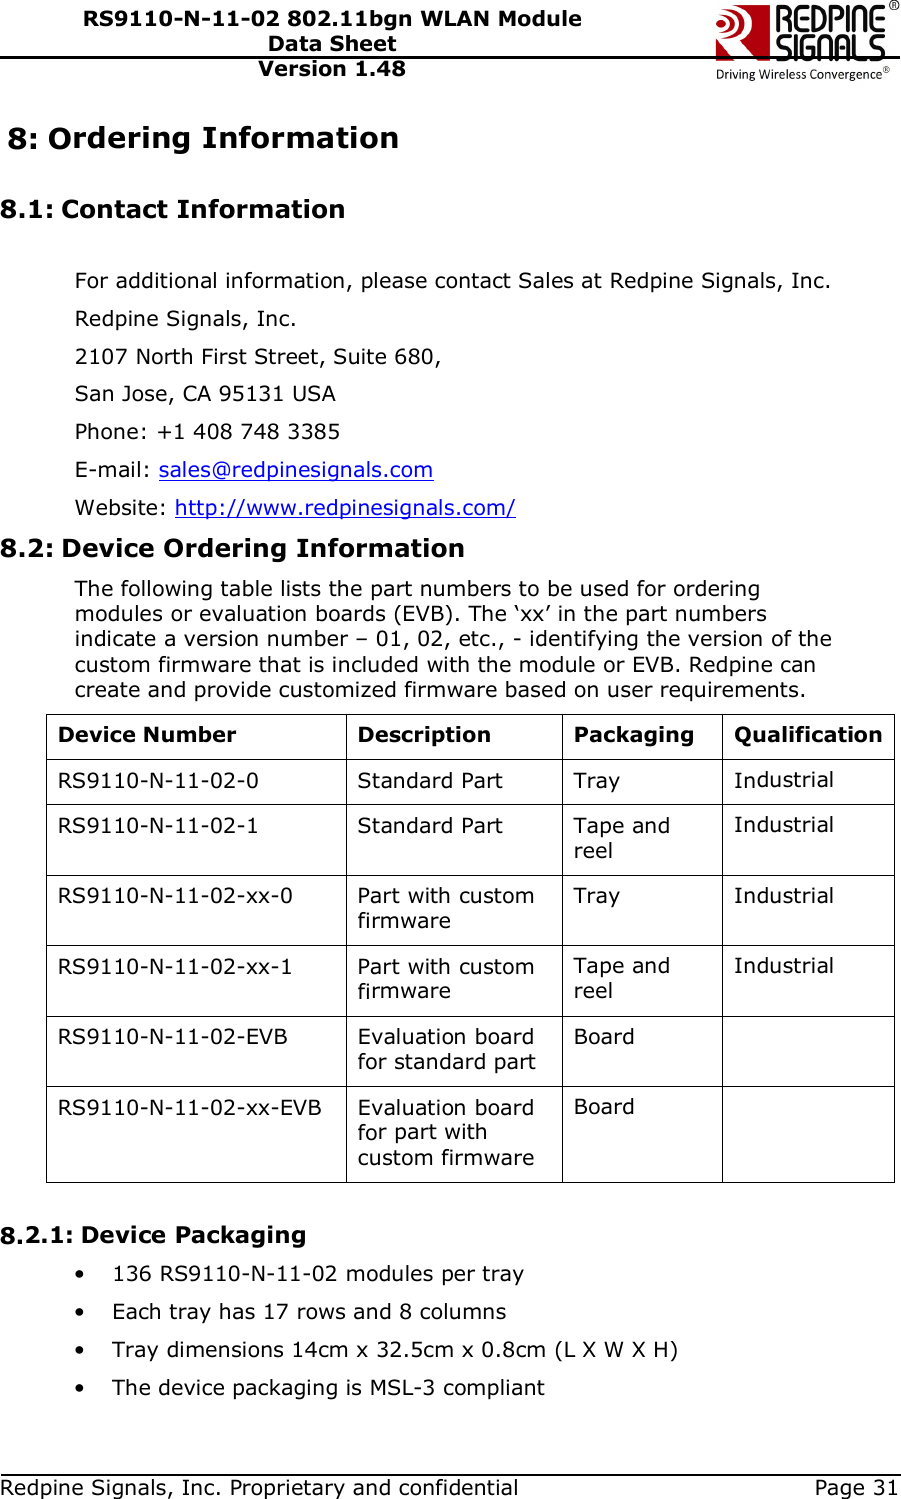   Redpine Signals, Inc. Proprietary and confidential  Page 31 RS9110-N-11-02 802.11bgn WLAN Module Data Sheet Version 1.48 8: Ordering Information  8.1: Contact Information  For additional information, please contact Sales at Redpine Signals, Inc. Redpine Signals, Inc.  2107 North First Street, Suite 680,  San Jose, CA 95131 USA Phone: +1 408 748 3385 E-mail: sales@redpinesignals.com  Website: http://www.redpinesignals.com/  8.2: Device Ordering Information The following table lists the part numbers to be used for ordering modules or evaluation boards (EVB). The ‘xx’ in the part numbers indicate a version number – 01, 02, etc., - identifying the version of the custom firmware that is included with the module or EVB. Redpine can create and provide customized firmware based on user requirements.  Device Number  Description  Packaging  Qualification RS9110-N-11-02-0  Standard Part  Tray  Industrial RS9110-N-11-02-1  Standard Part  Tape and reel Industrial RS9110-N-11-02-xx-0  Part with custom firmware Tray  Industrial RS9110-N-11-02-xx-1  Part with custom firmware Tape and reel Industrial RS9110-N-11-02-EVB  Evaluation board for standard part Board   RS9110-N-11-02-xx-EVB  Evaluation board for part with custom firmware Board    8.2.1: Device Packaging • 136 RS9110-N-11-02 modules per tray • Each tray has 17 rows and 8 columns • Tray dimensions 14cm x 32.5cm x 0.8cm (L X W X H) • The device packaging is MSL-3 compliant 